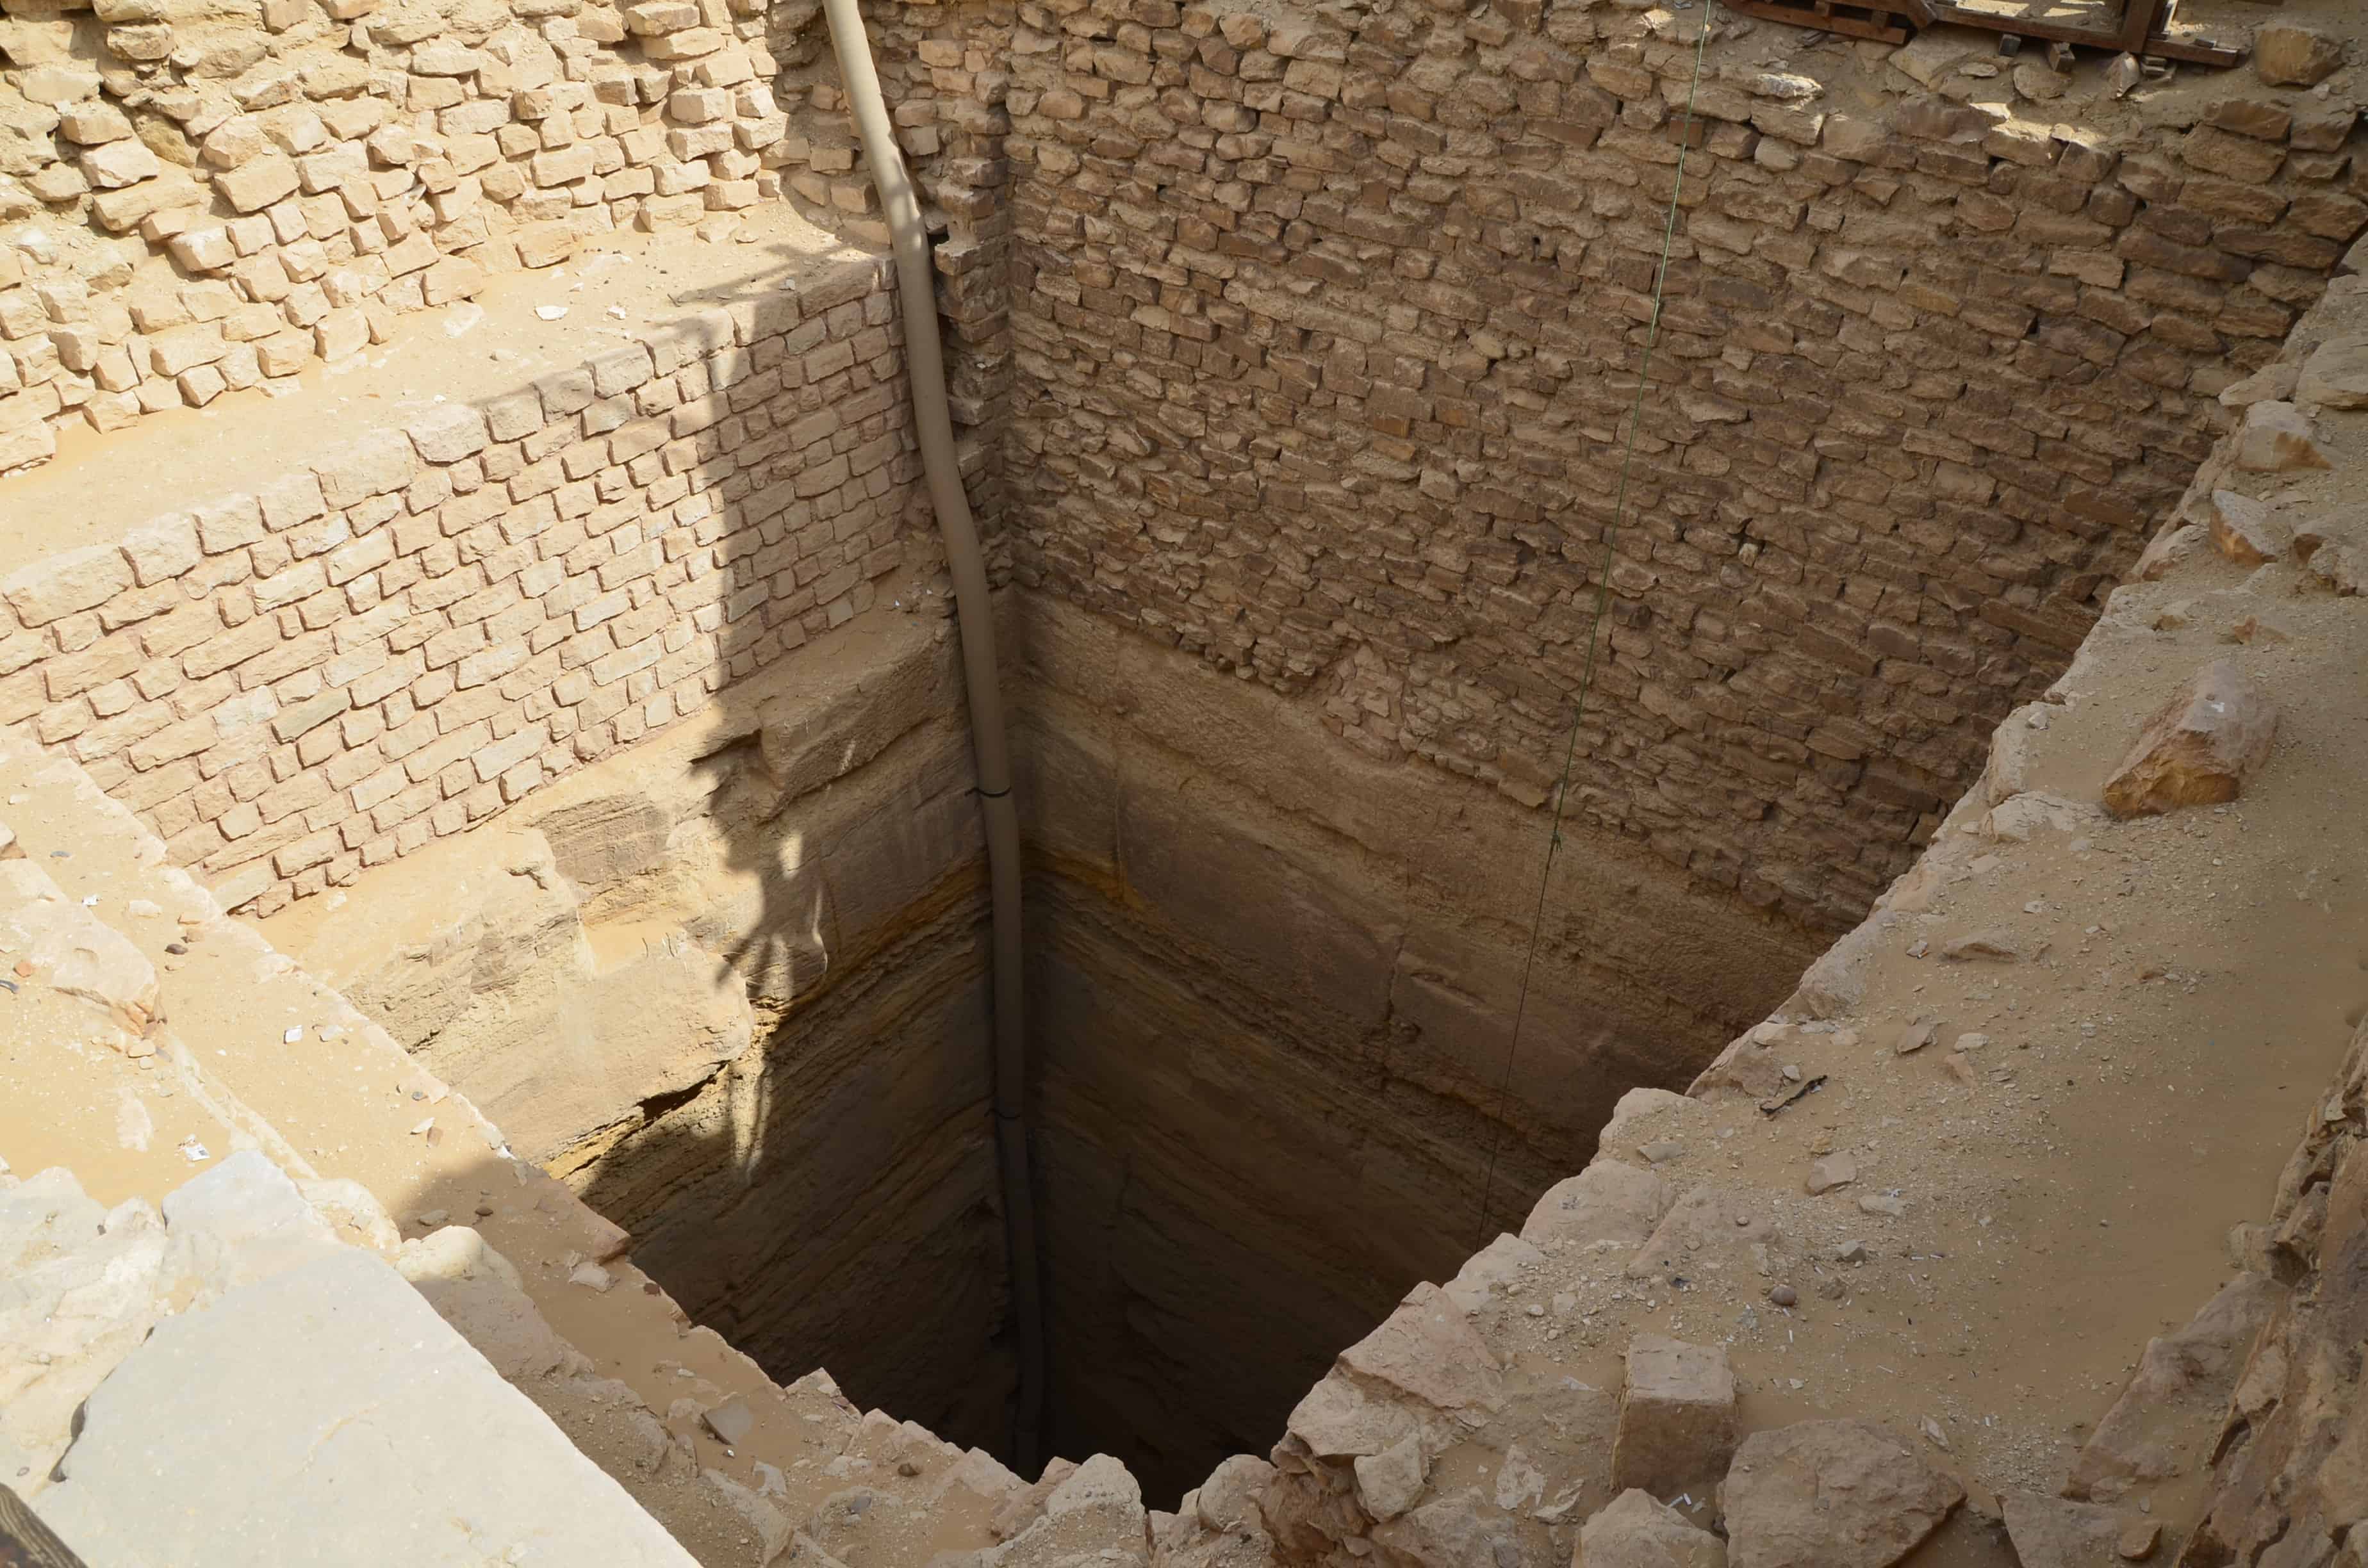 A pit where a statue was found at the Step Pyramid of Djoser at Saqqara, Egypt